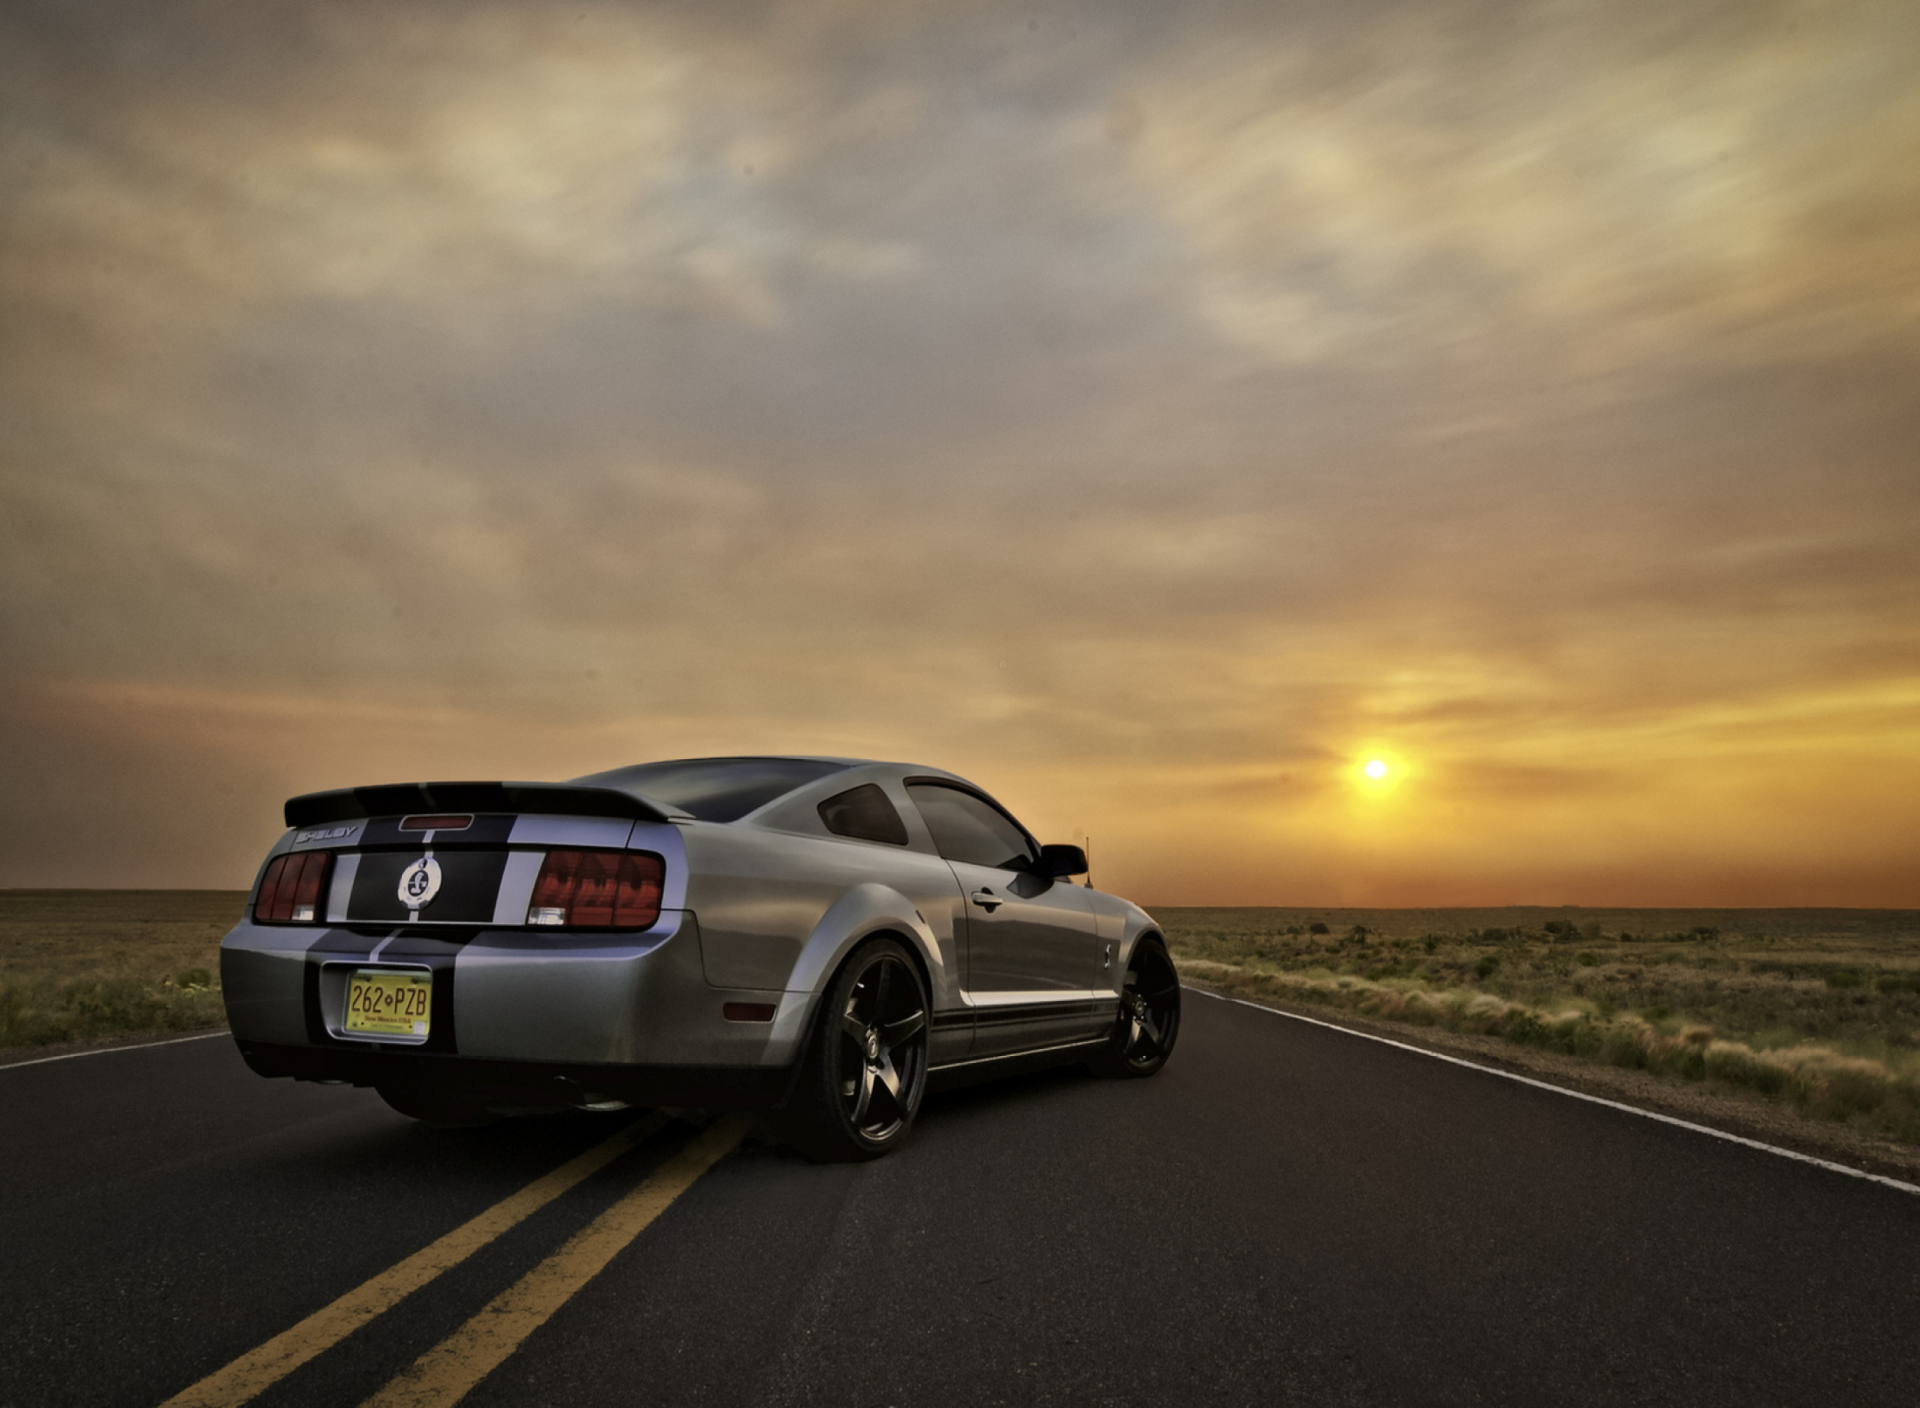 Ford Mustang Shelby GT500 wallpaper 1920x1408